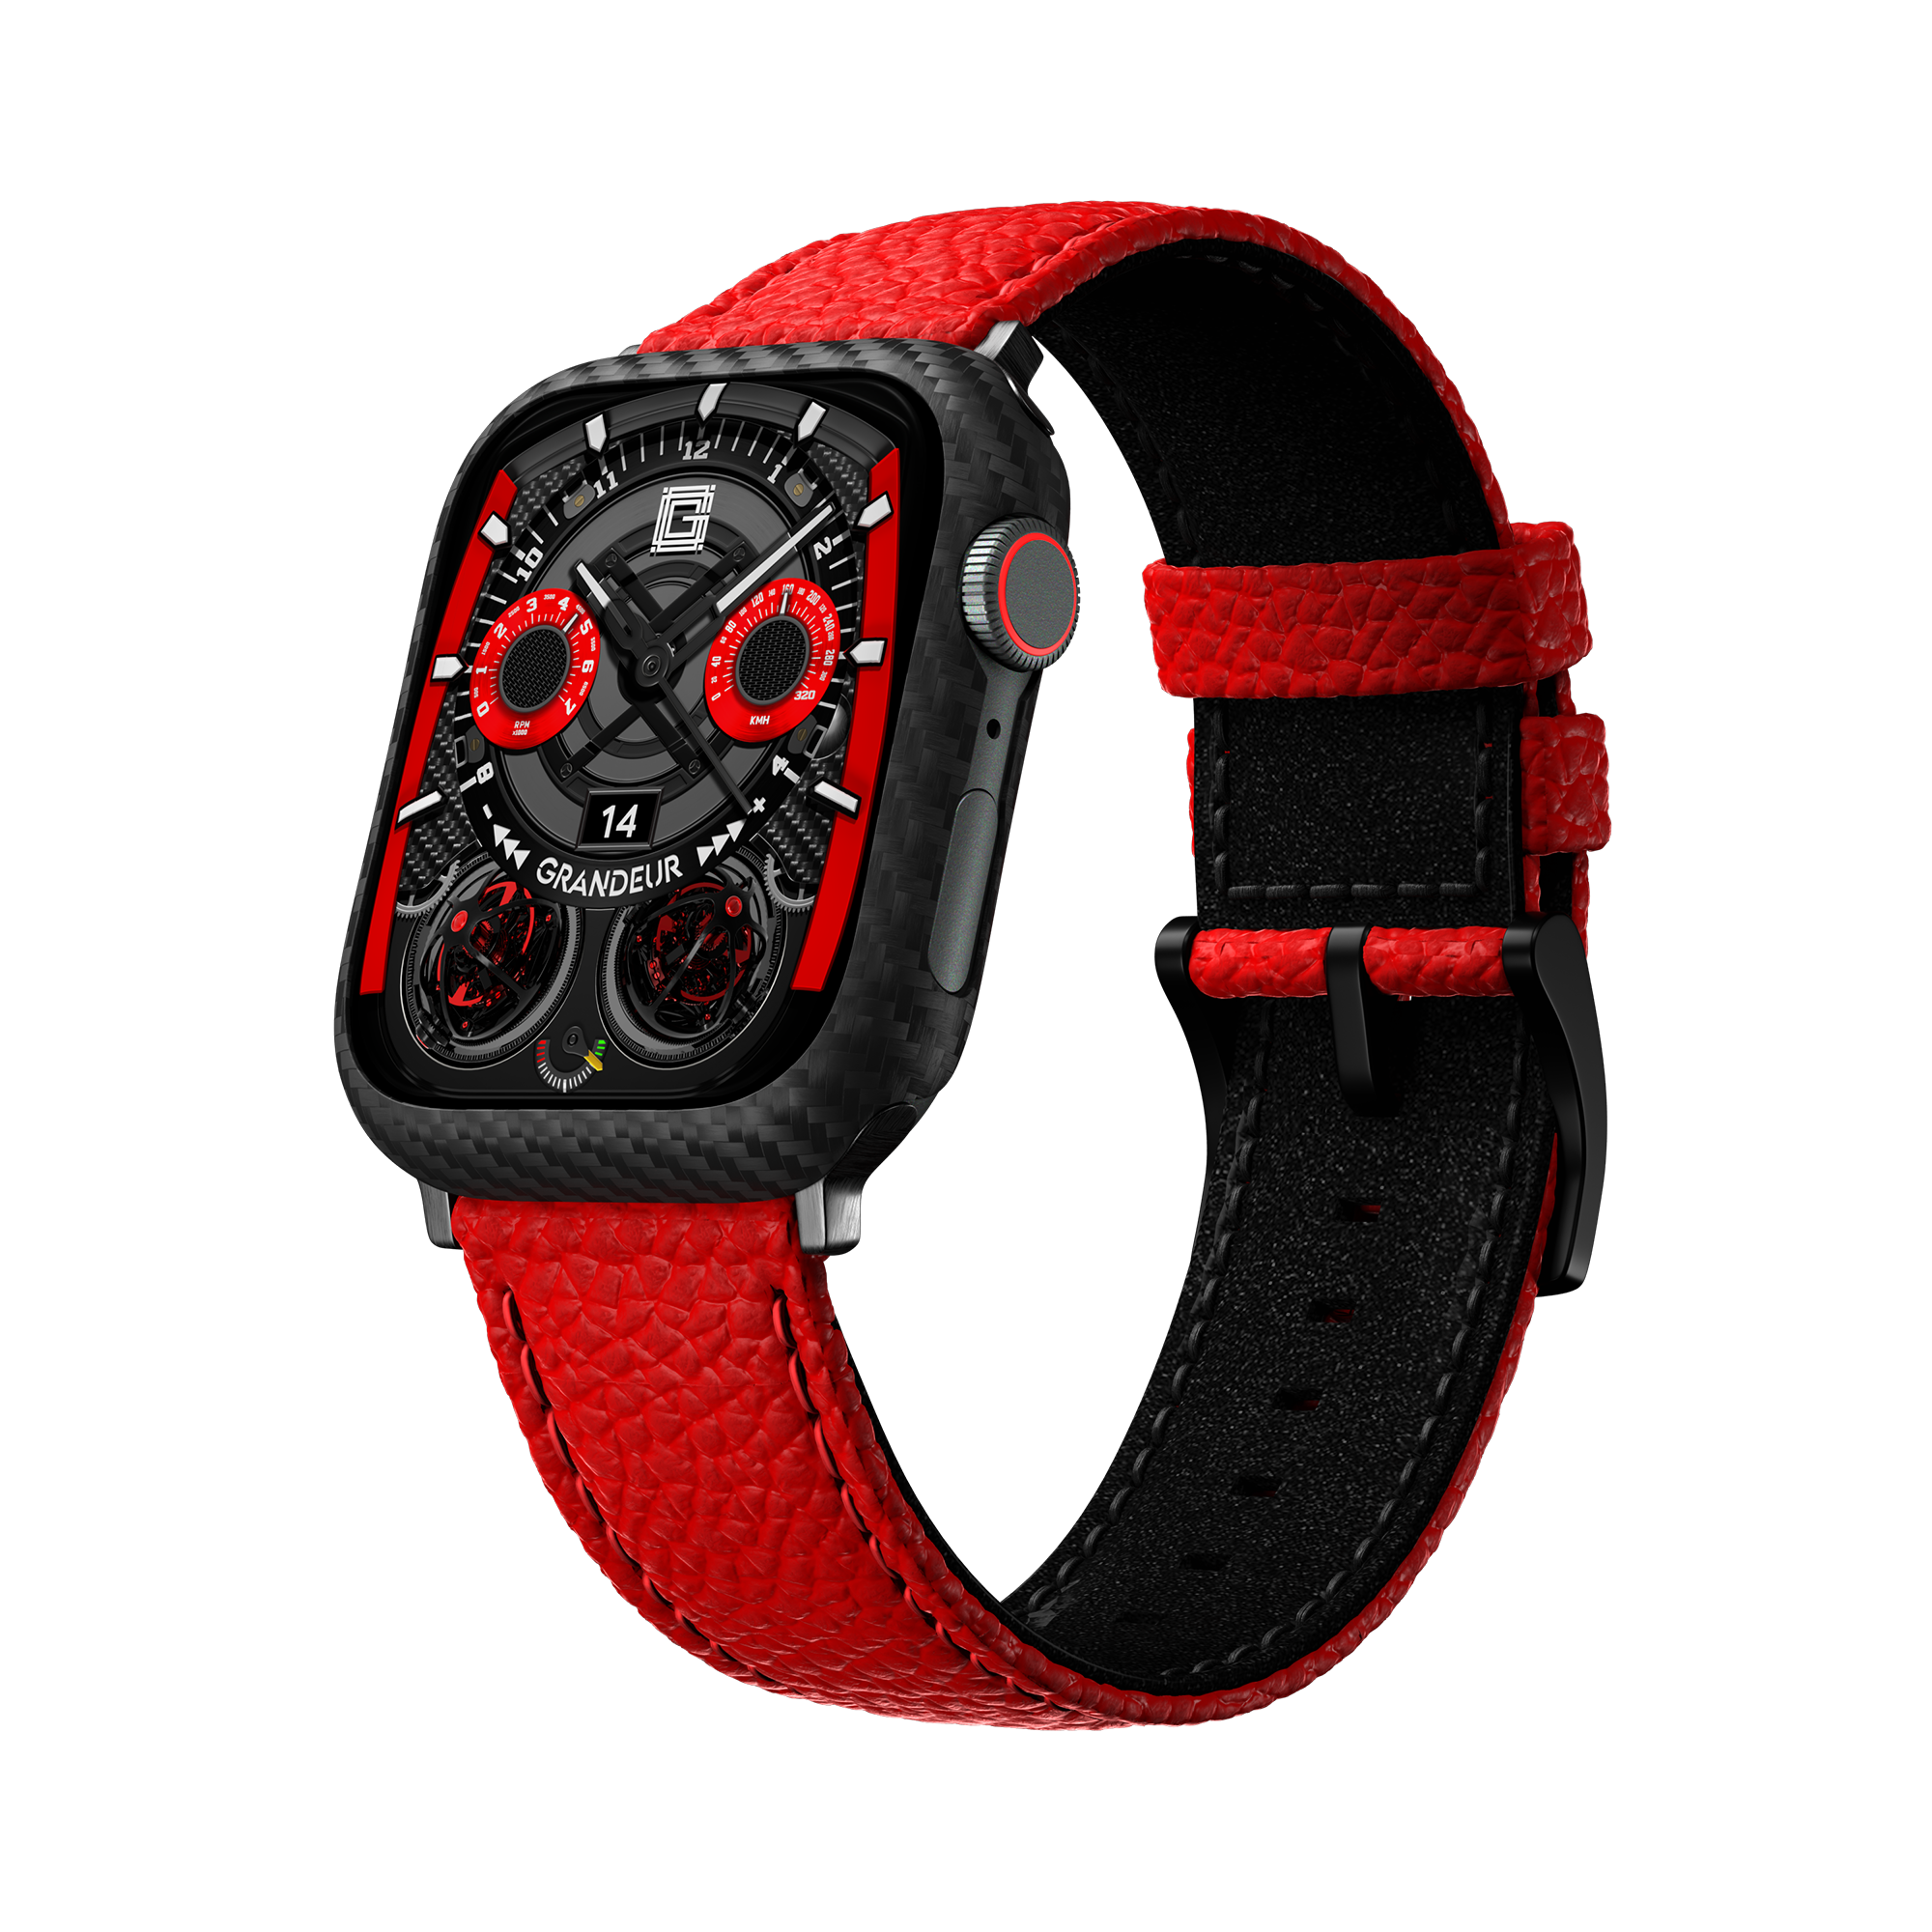 Togo Leather Apple Watch Strap - lipstick red